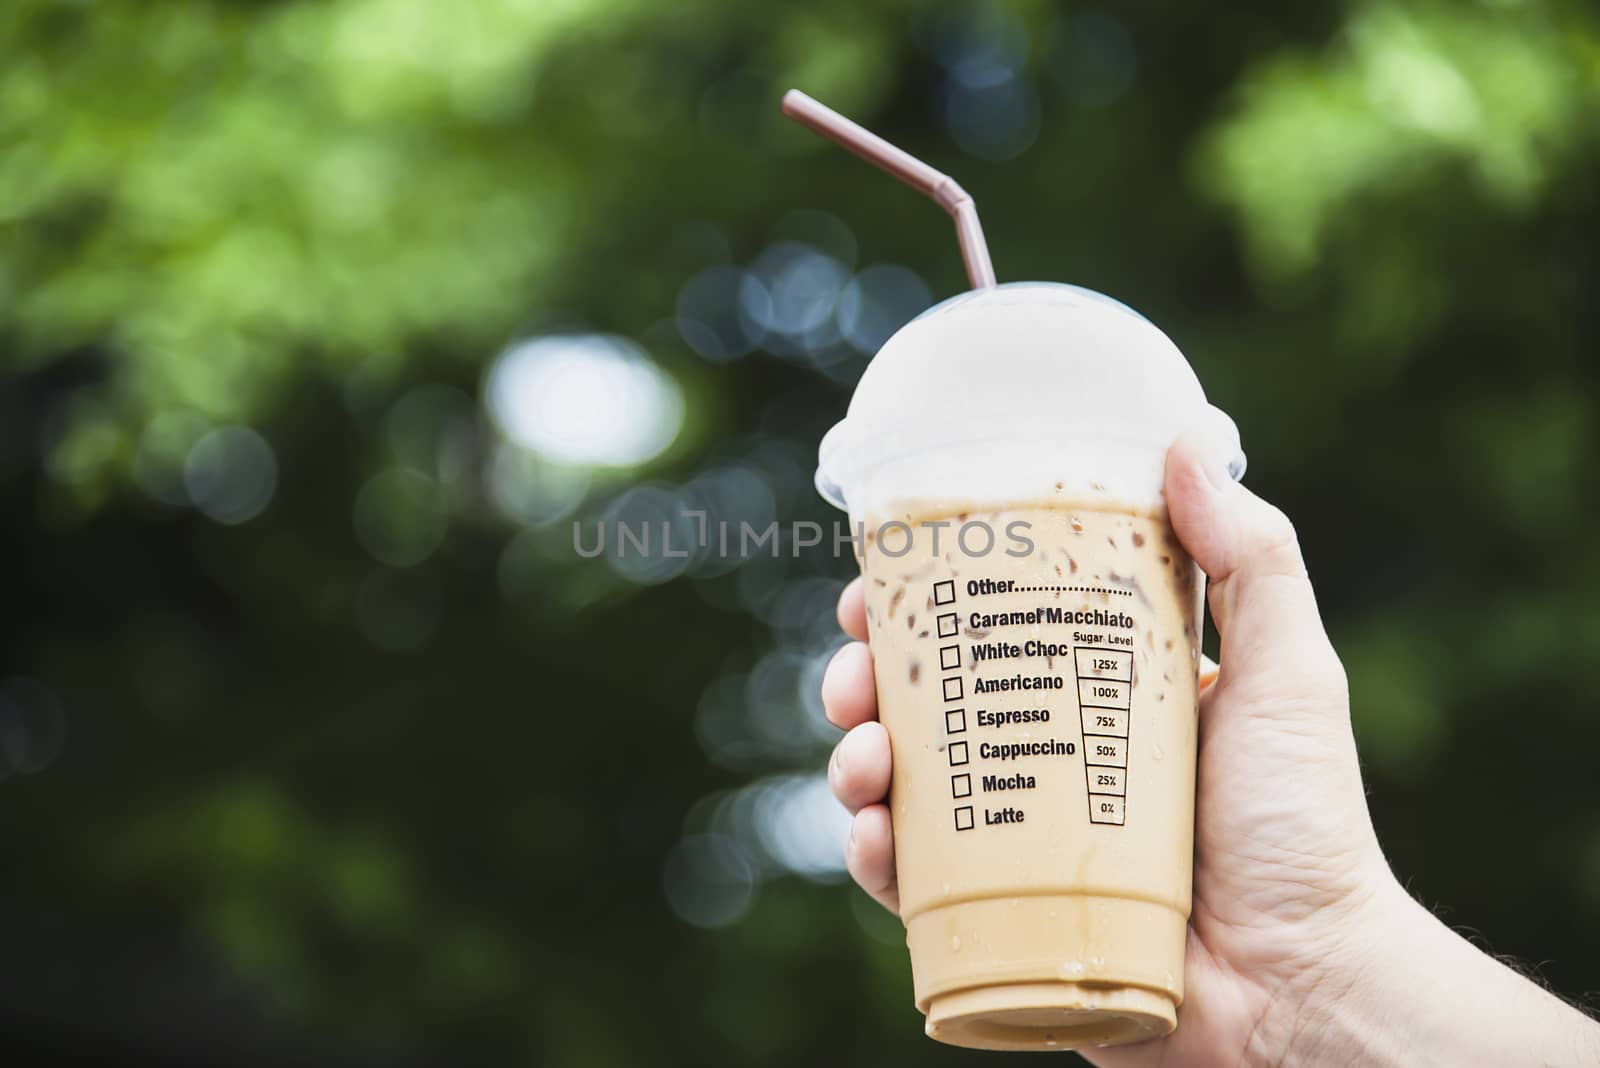 Hand showing fresh ice coffee cup - refreshment with ice coffee cup background concept by pairhandmade